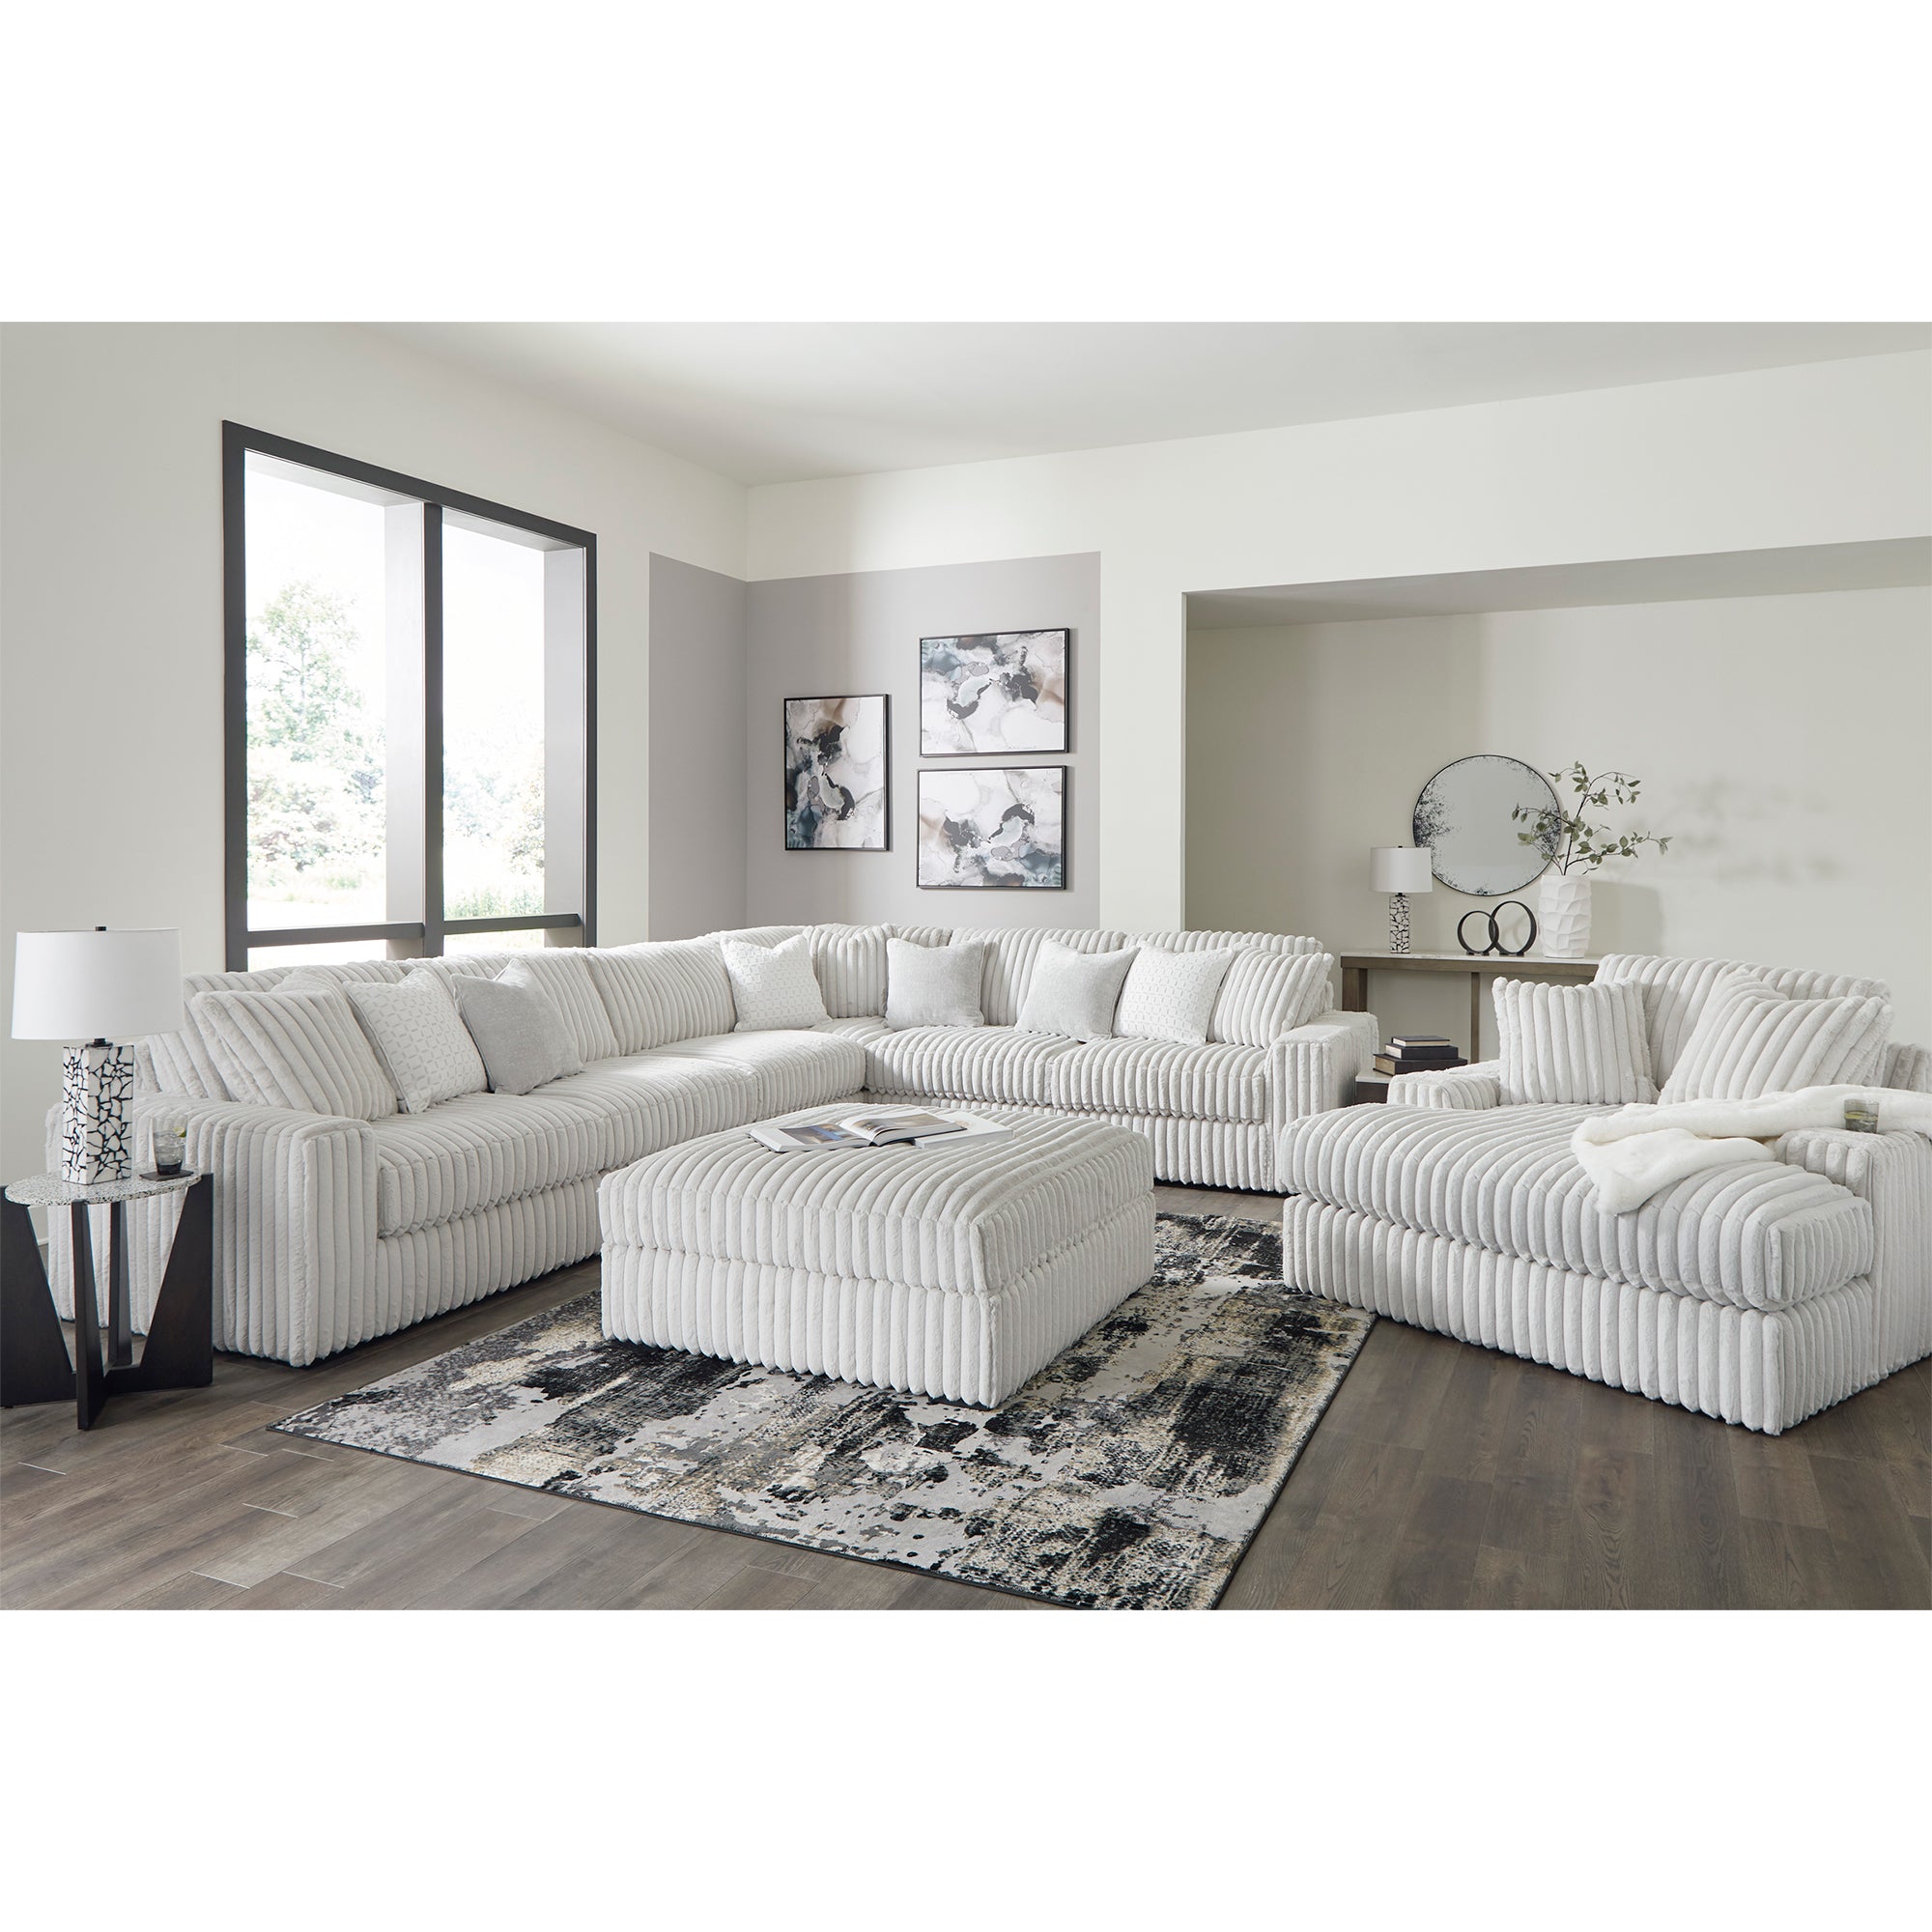 Contemporary Stupendous Chaise with unique eye for design, ensures everyday comfort with its oversized, soft seating